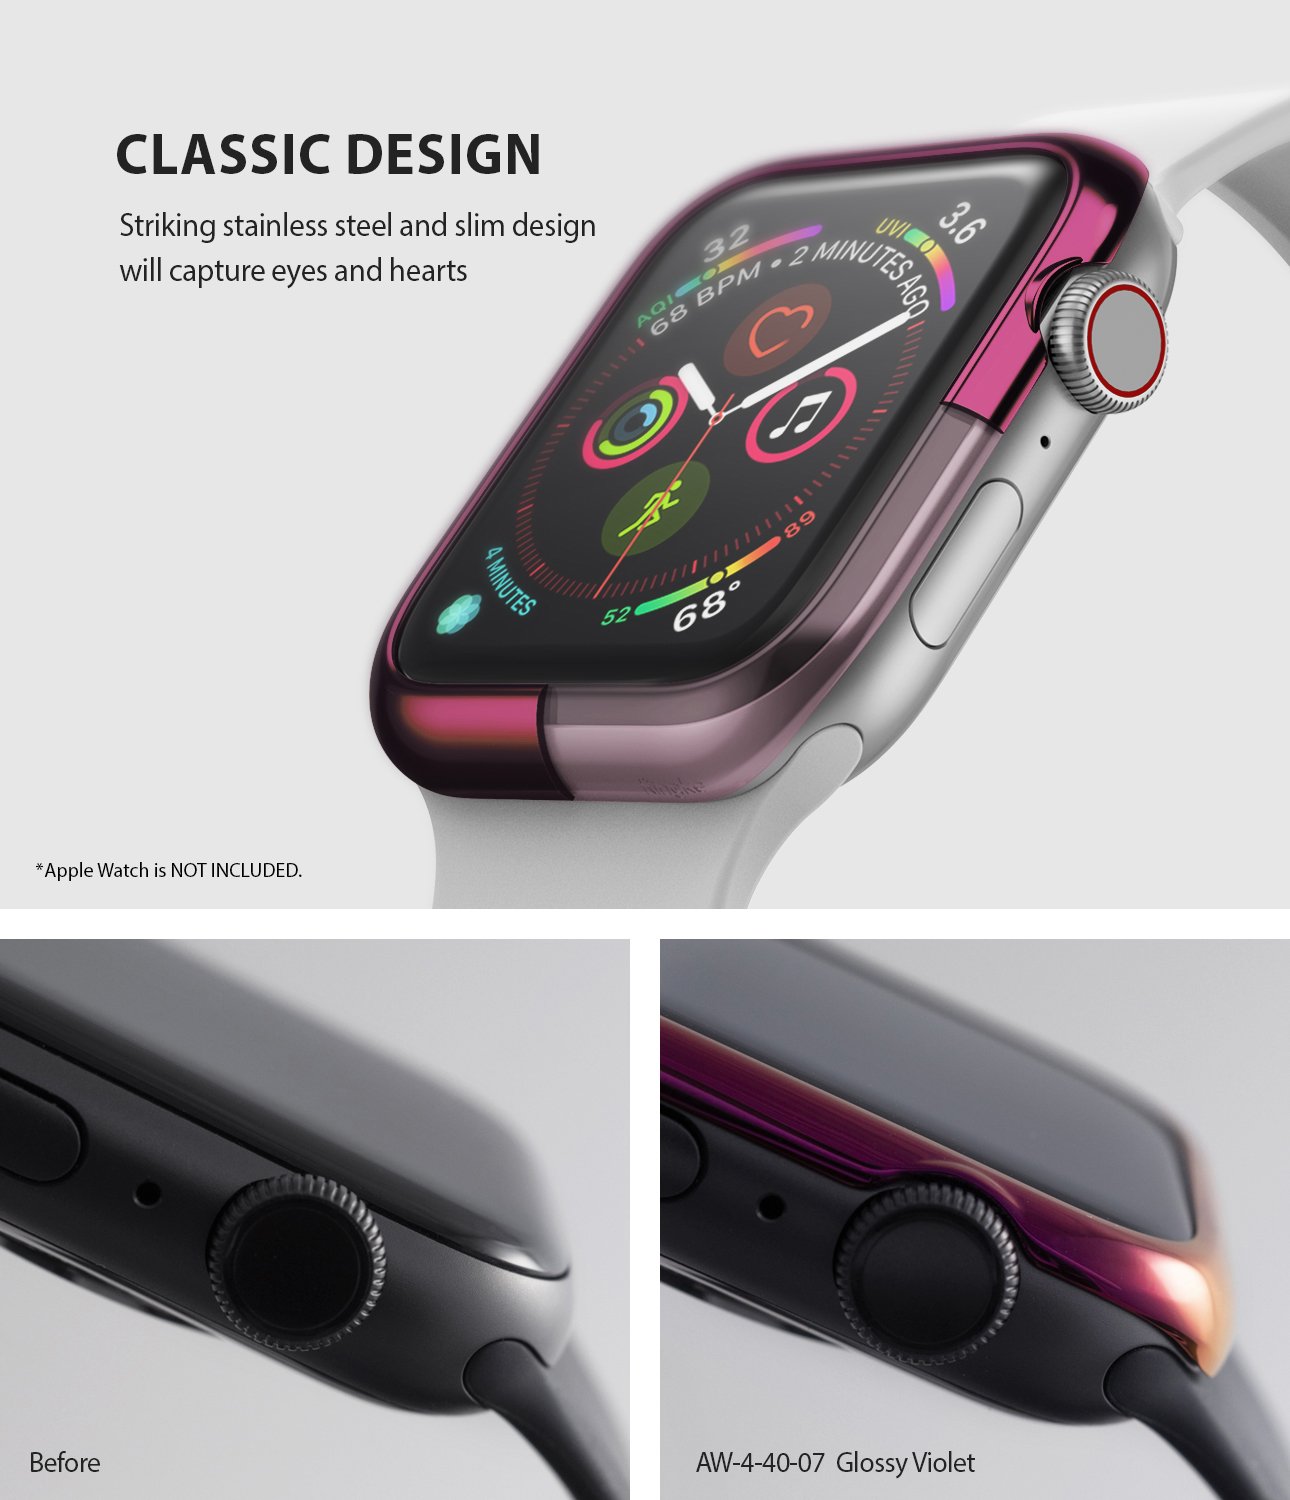 ringke bezel styling 40-07 Glossy Violet stainless steel on apple watch series 6 / 5 / 4 / SE 40mm classic design